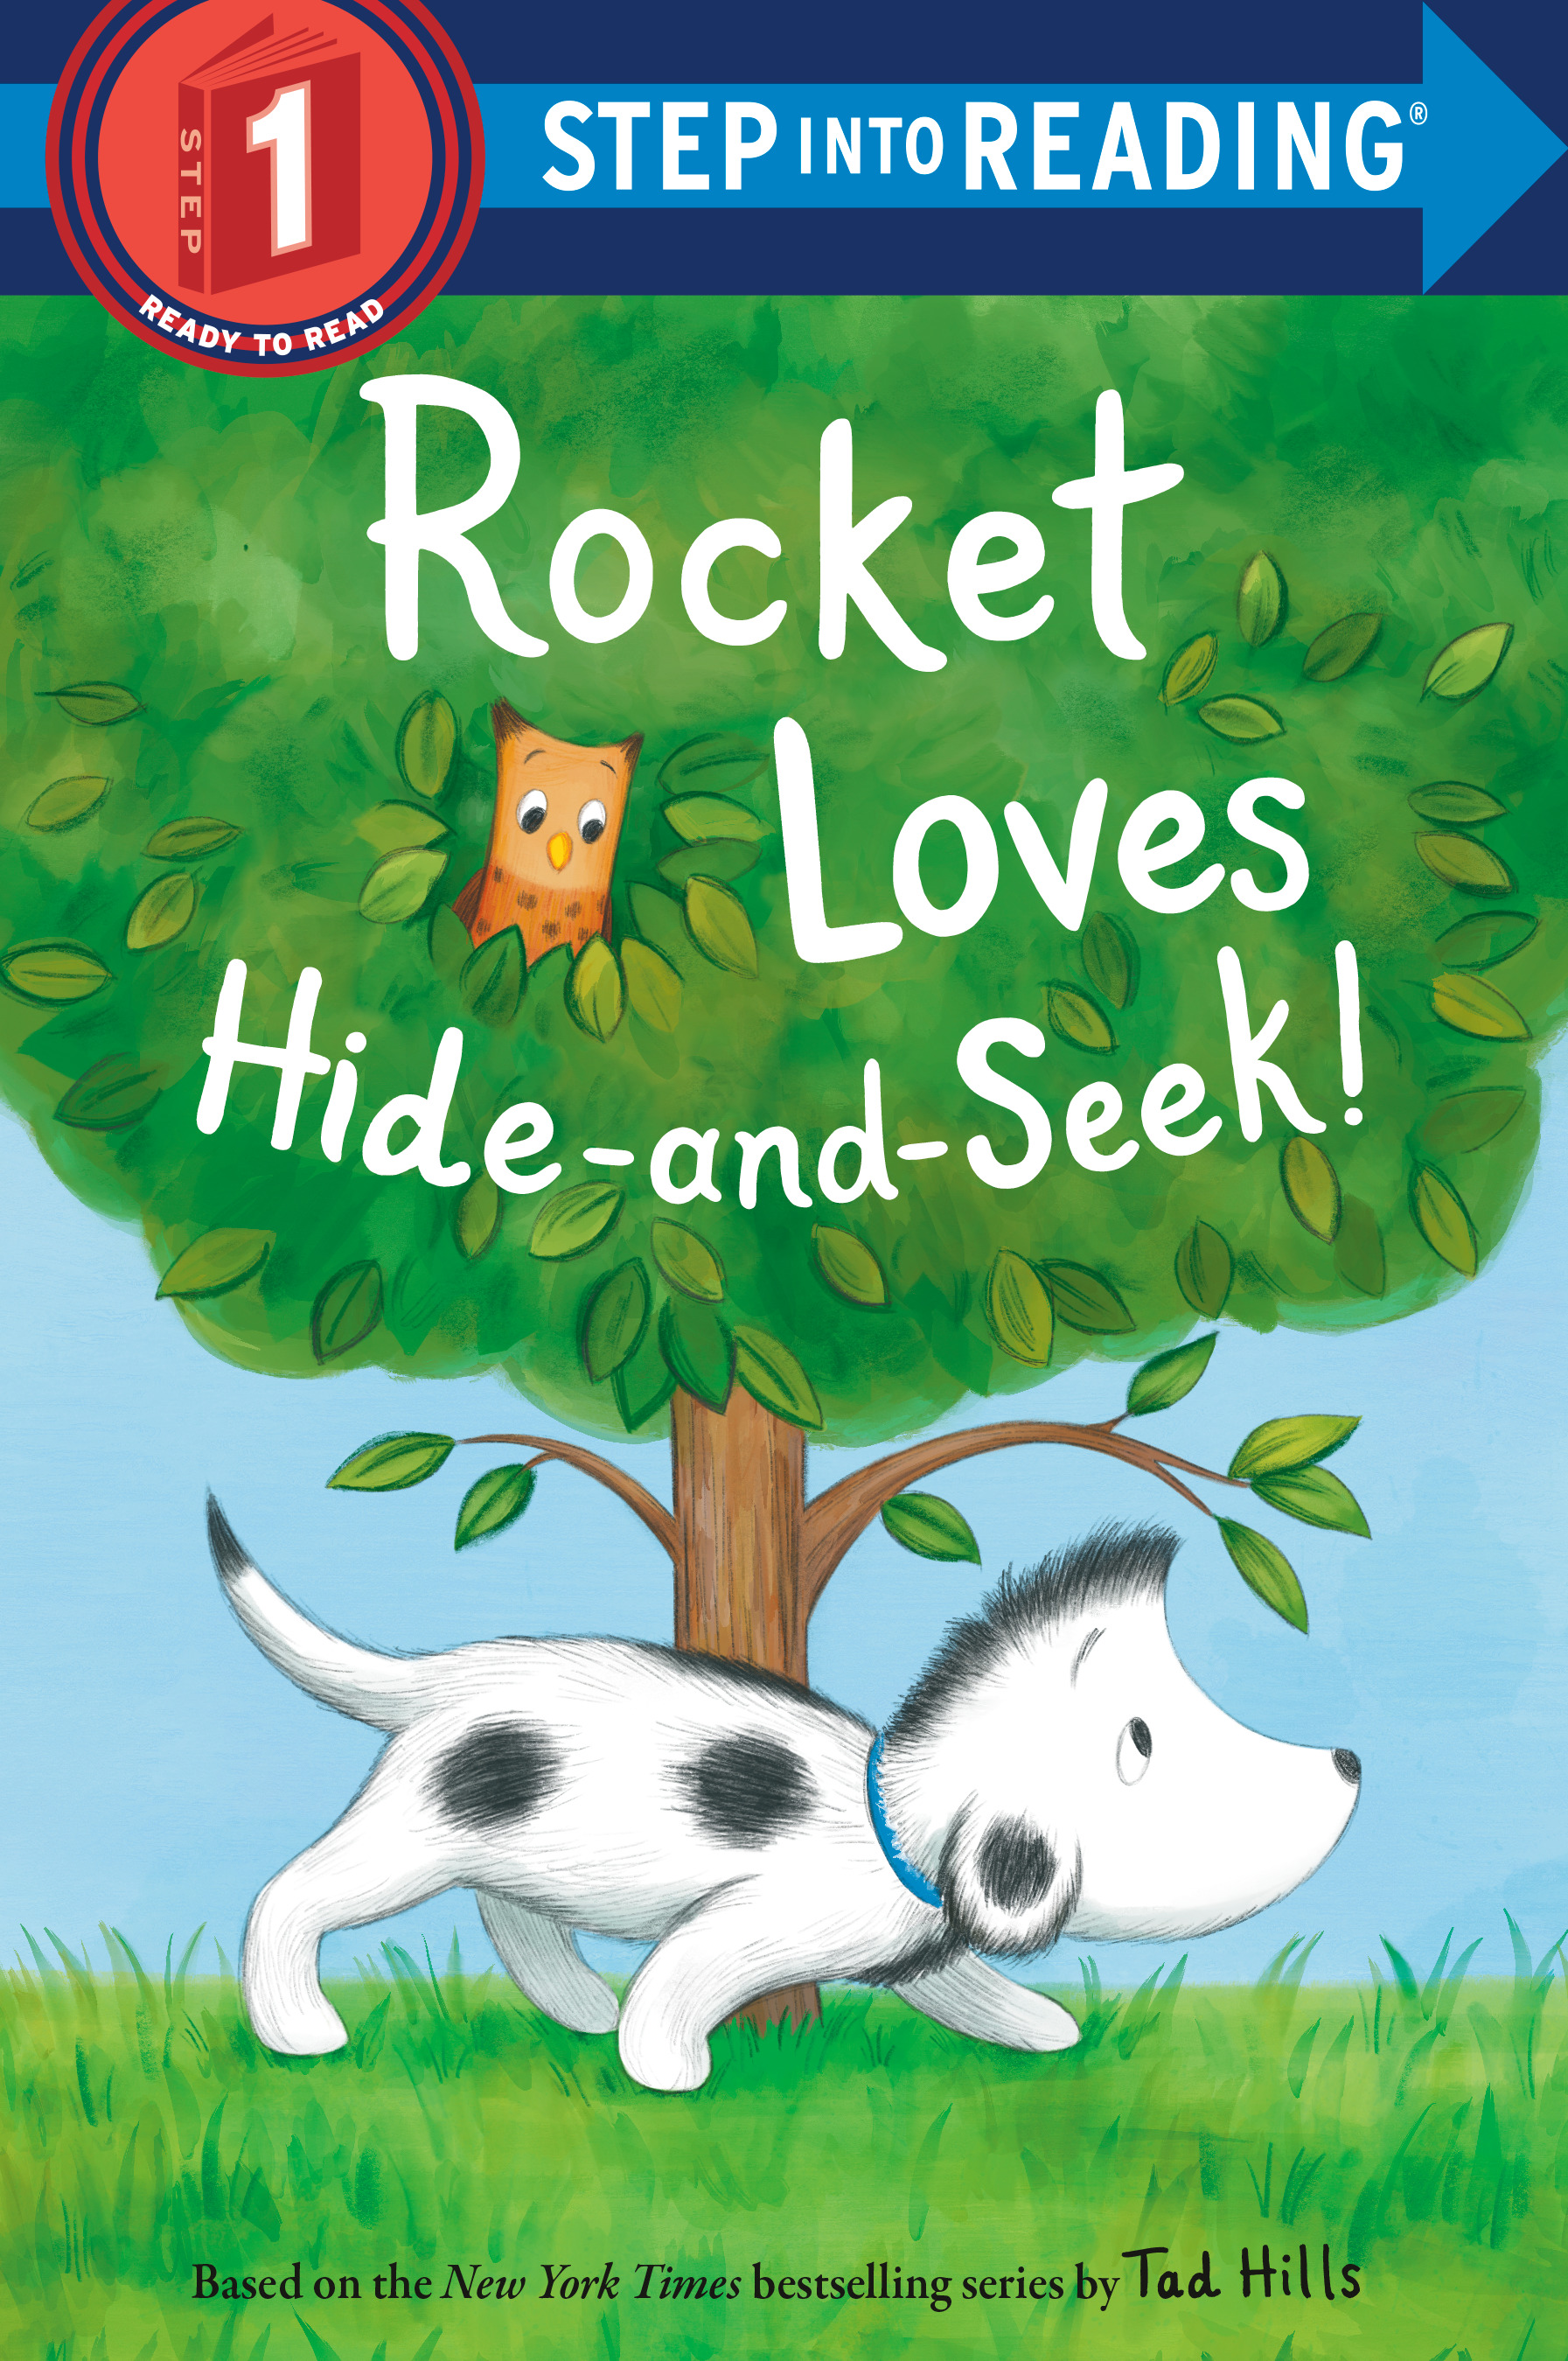 Step into Reading - Rocket Loves Hide-and-Seek! | First reader